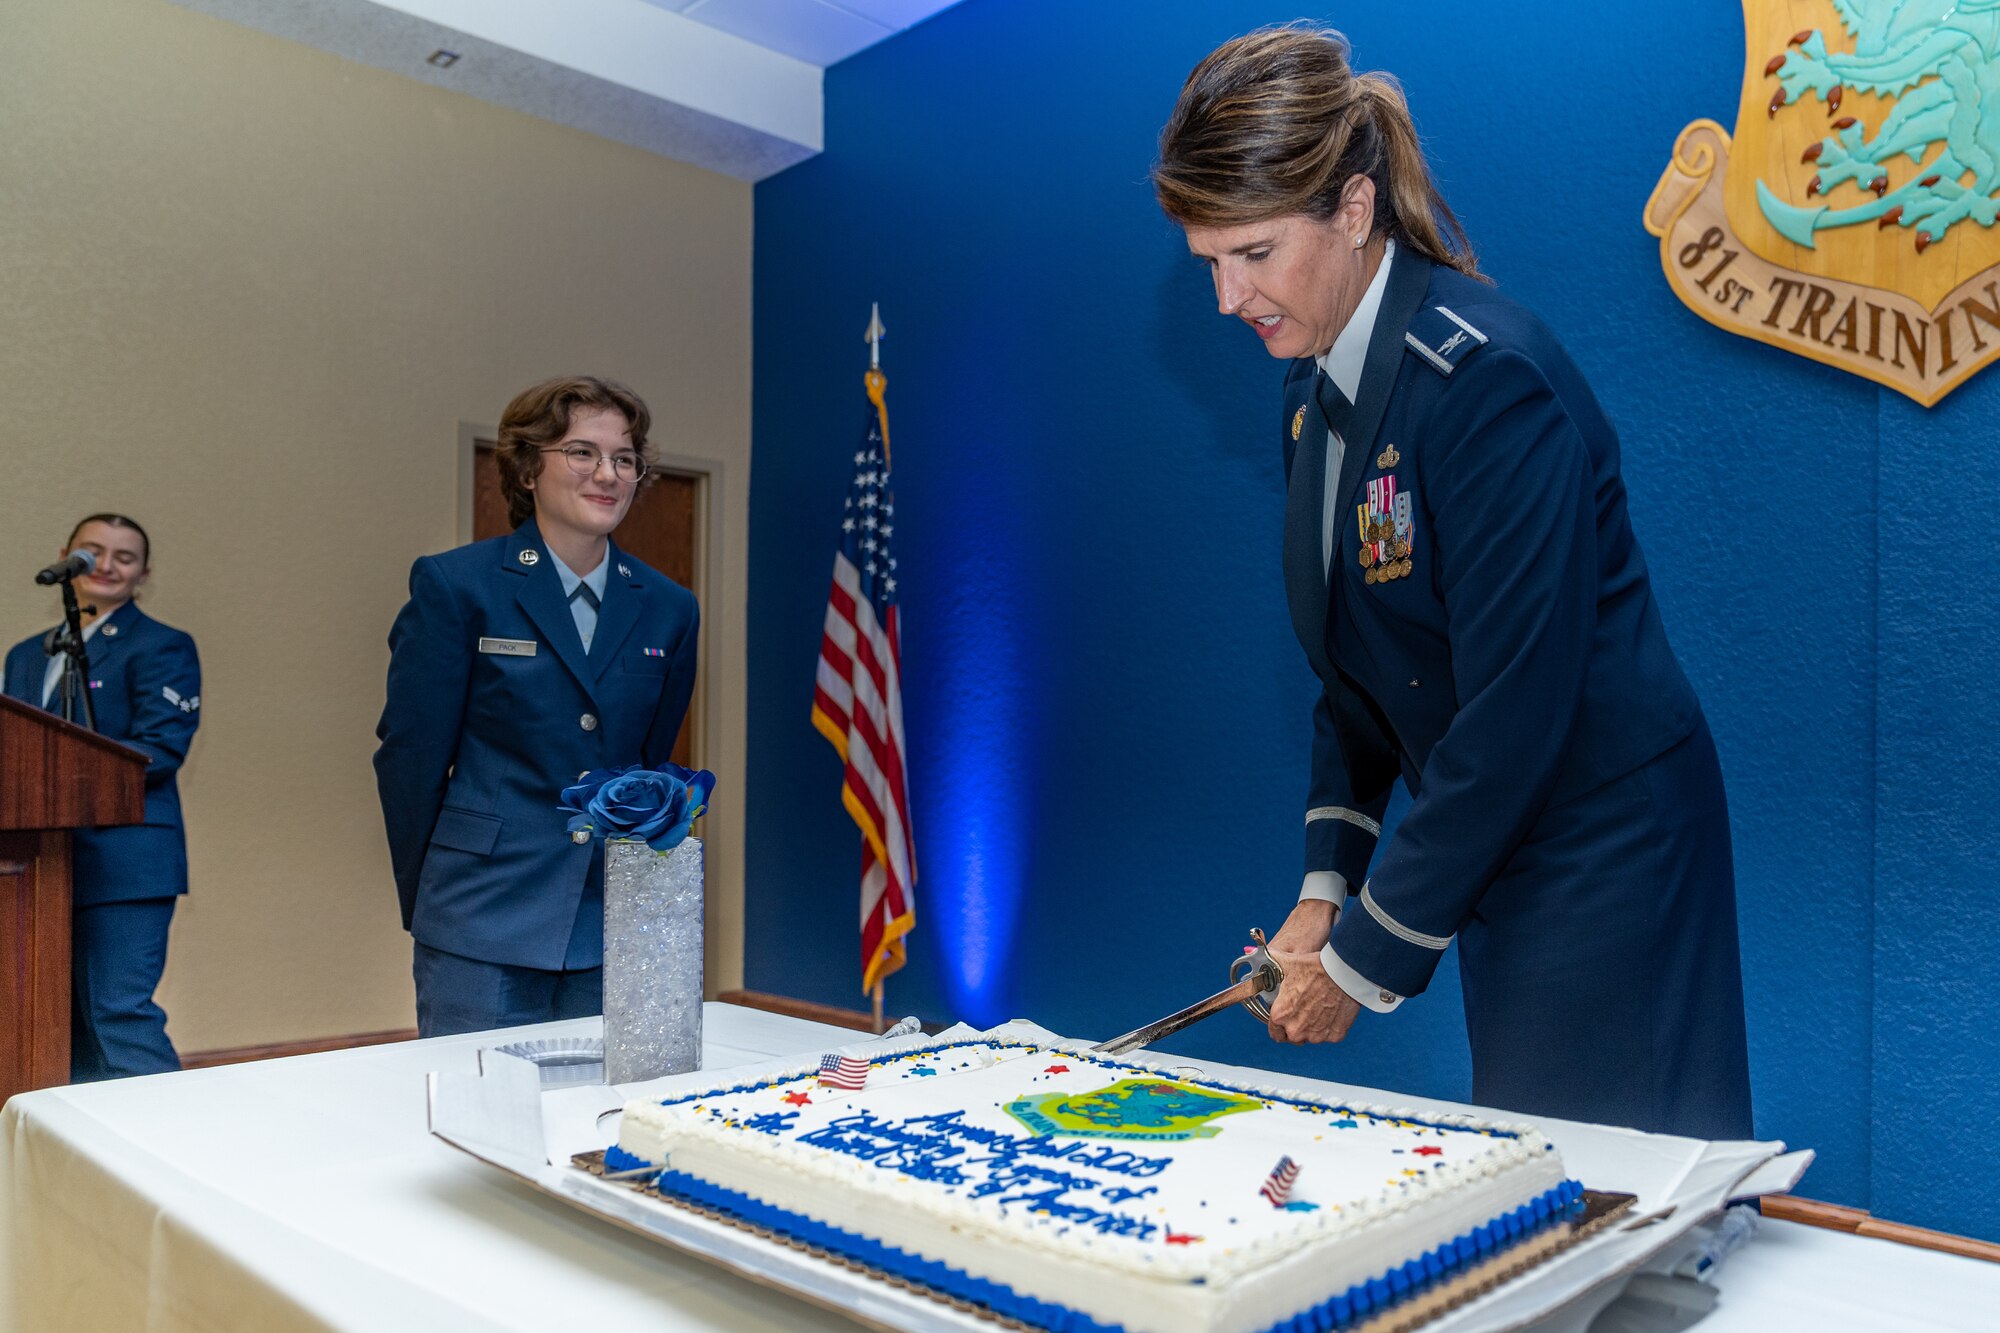 U.S. Air Force Col. Laura King, 81st Training Group commander, cuts the cake to hand to Airman Madelyn Pack, 336th Training Squadron system operations technician in training, during the Airman’s Ball at Keesler Air Force Base, Mississippi, Sept. 14, 2023.